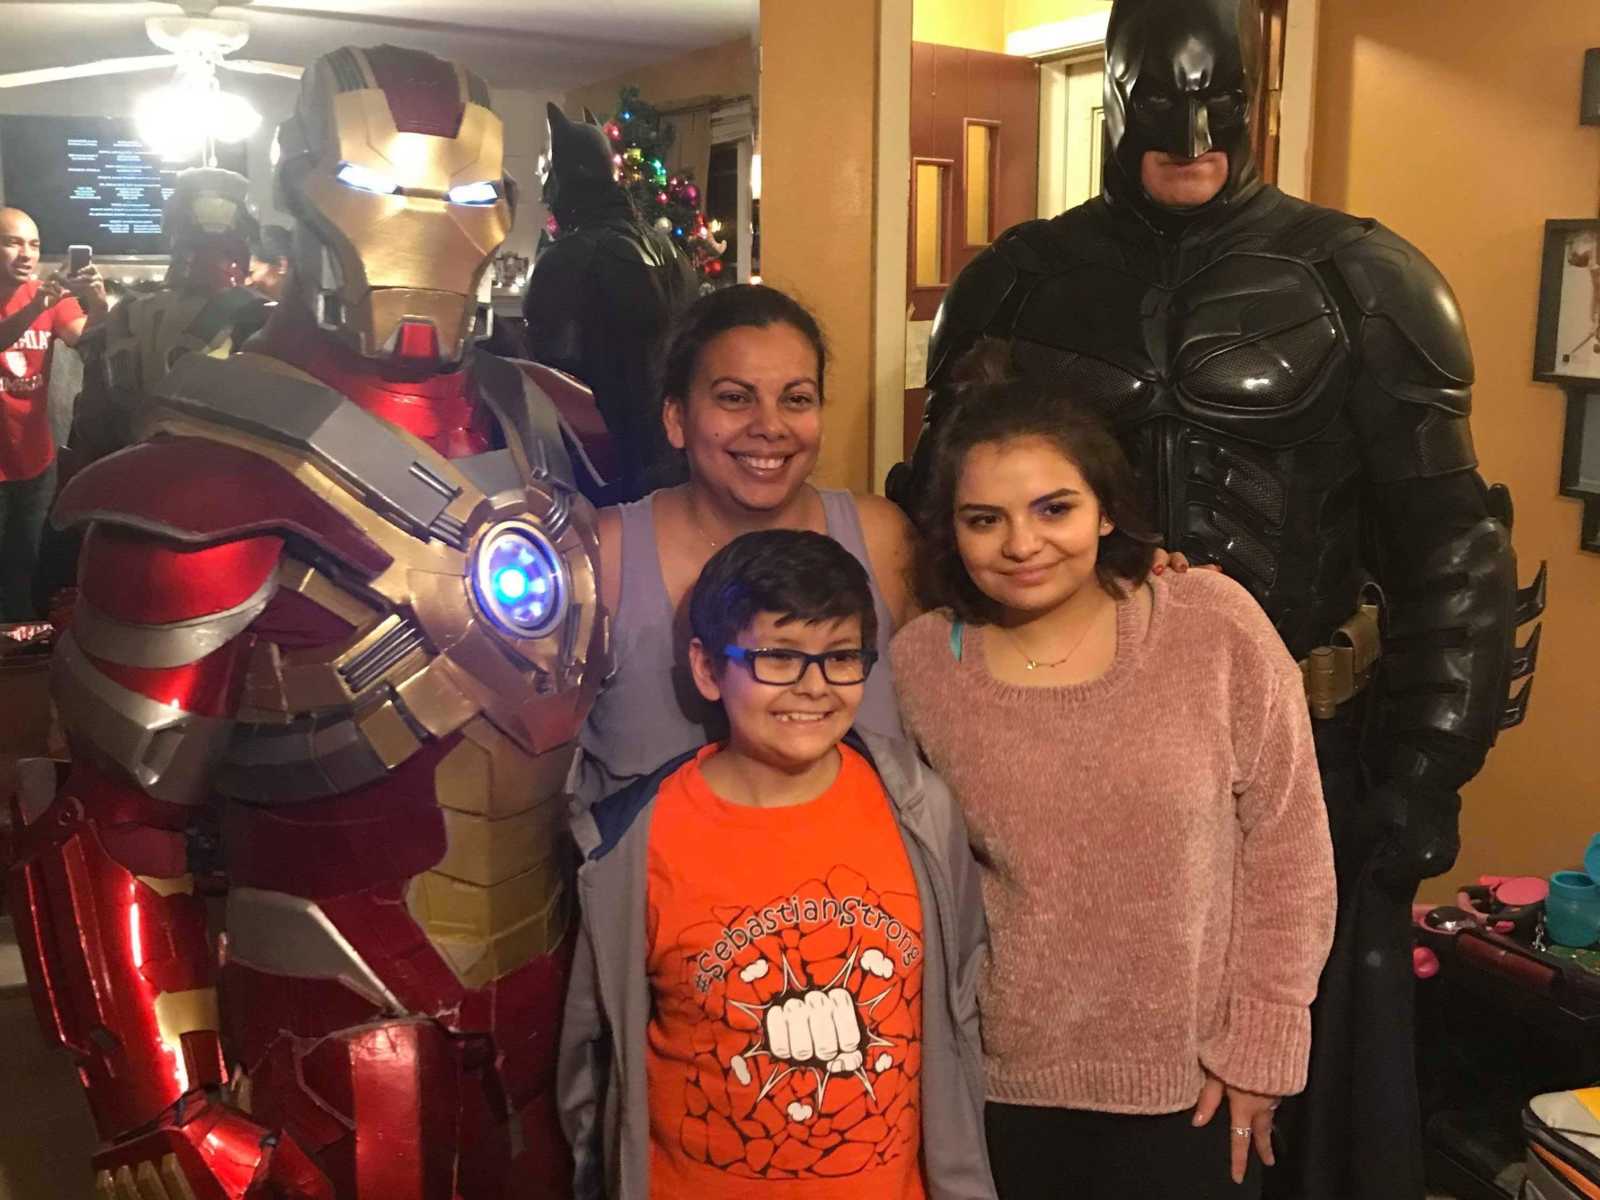 Boy with cancer smiles next to ironman, two female family members, and batman in his house